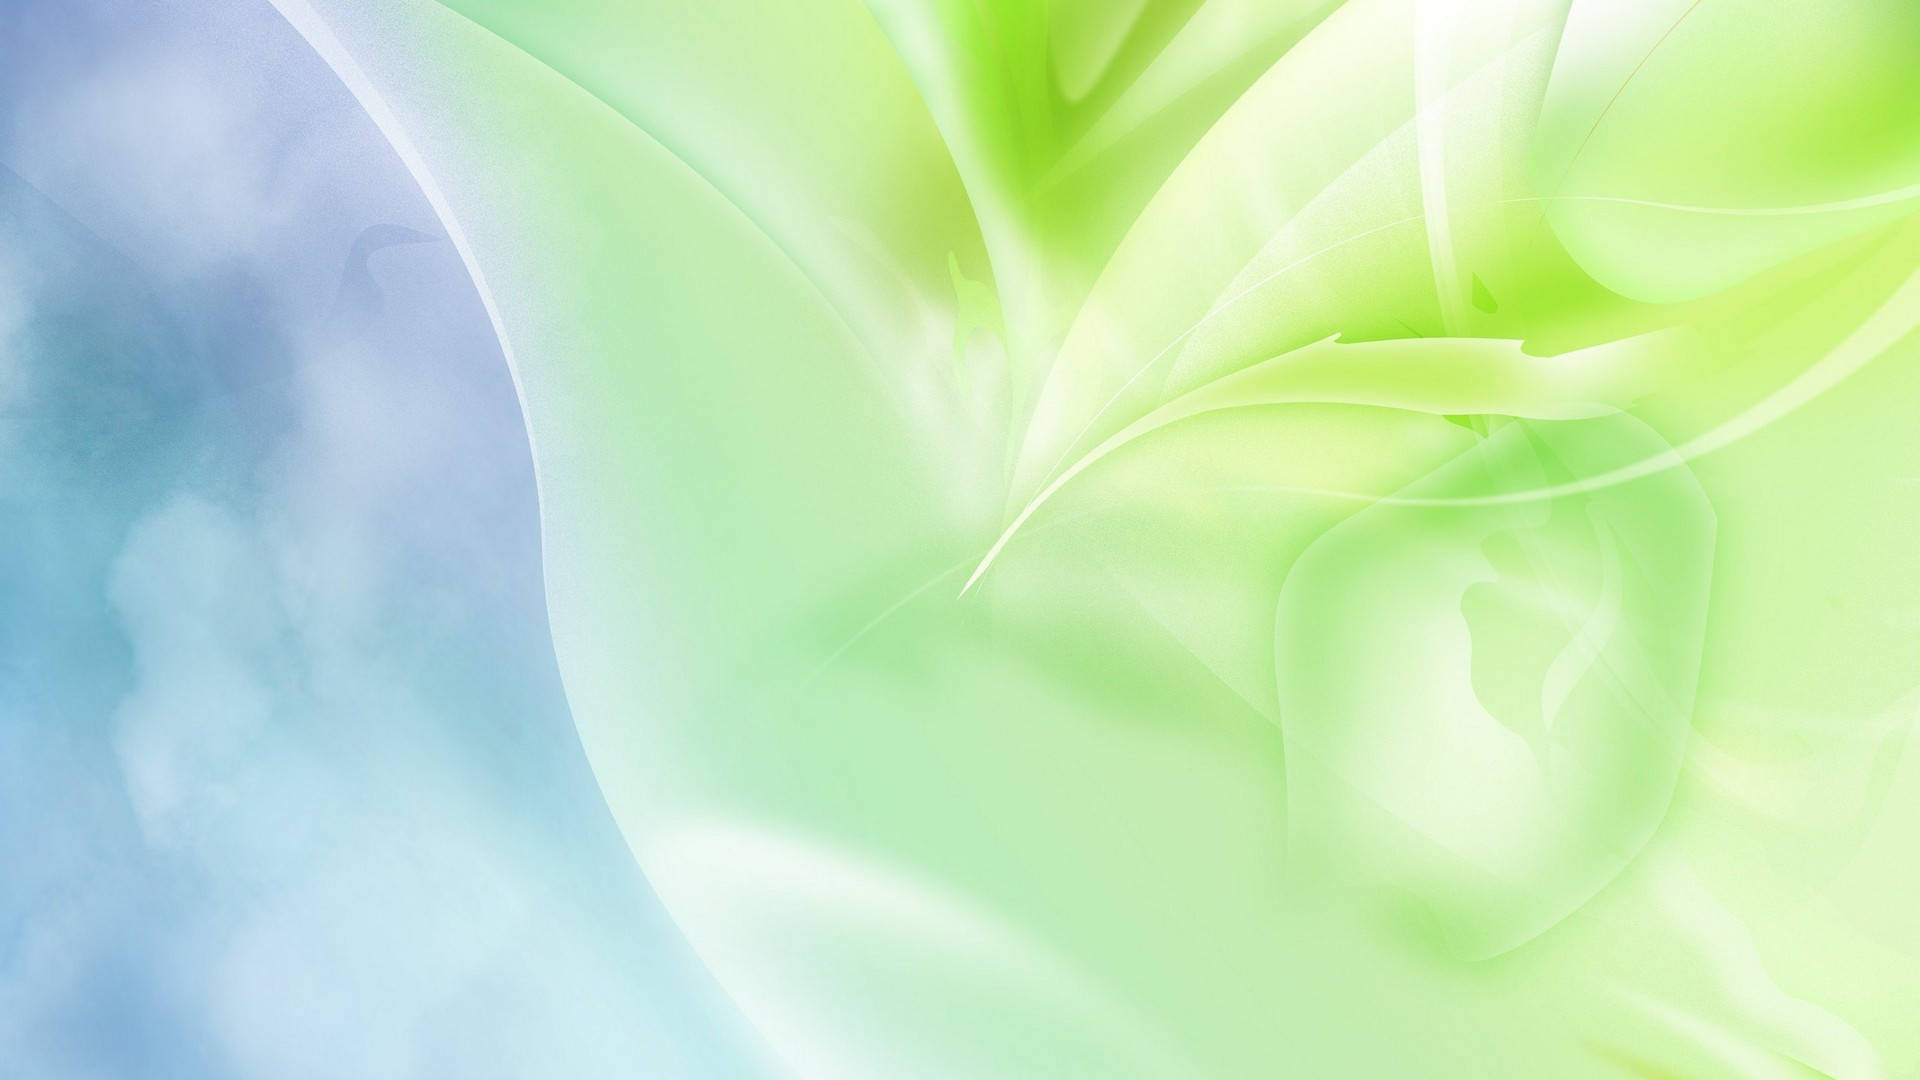 Super Light Green And Blue Abstract Wallpaper